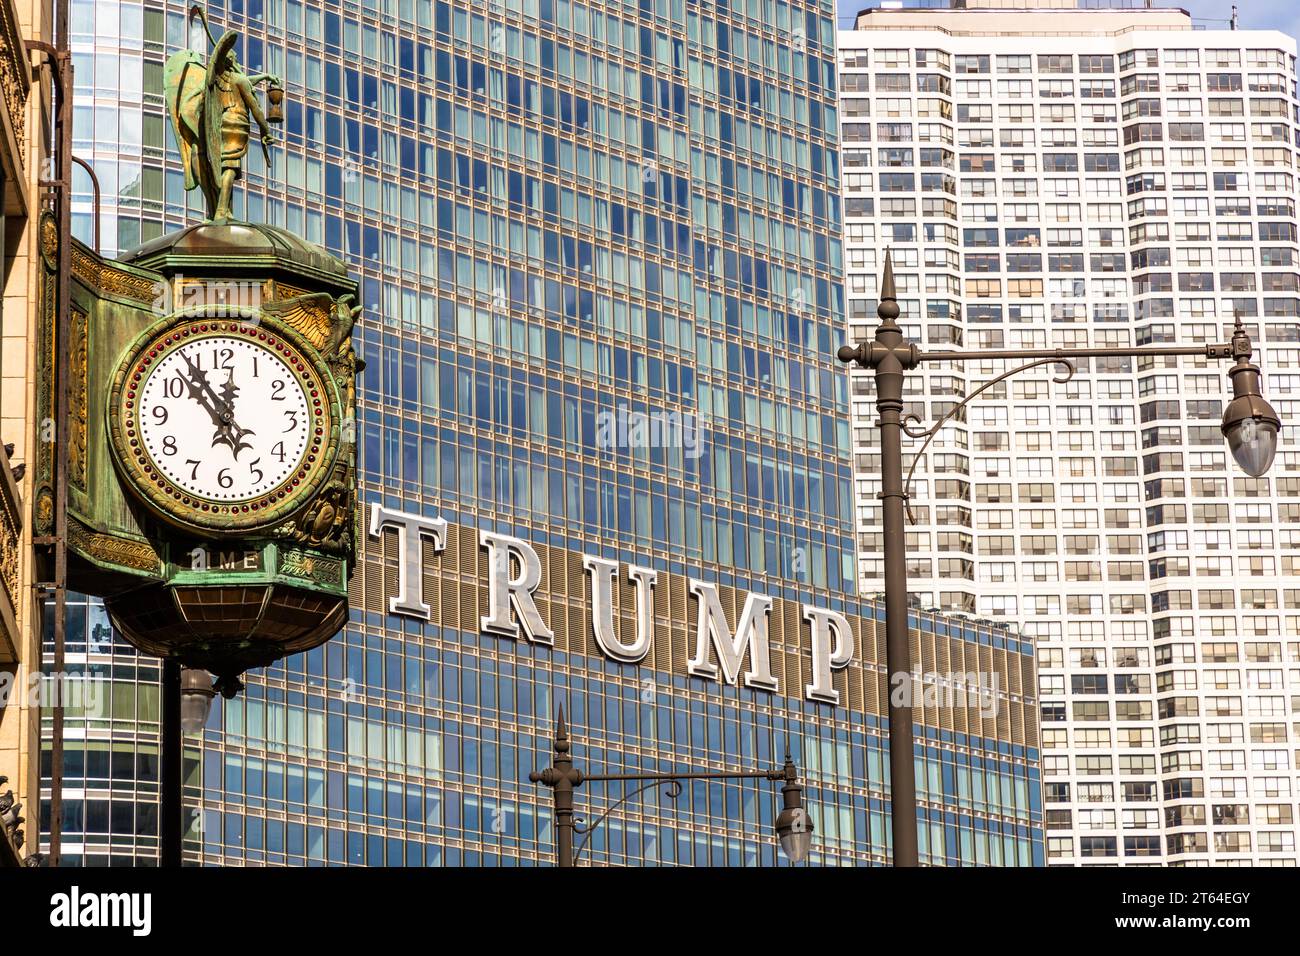 The clock on the Jewelers Building shows just before High Noon. In the background you can see the lettering Trump from Trump Tower. Chicago, United States Stock Photo